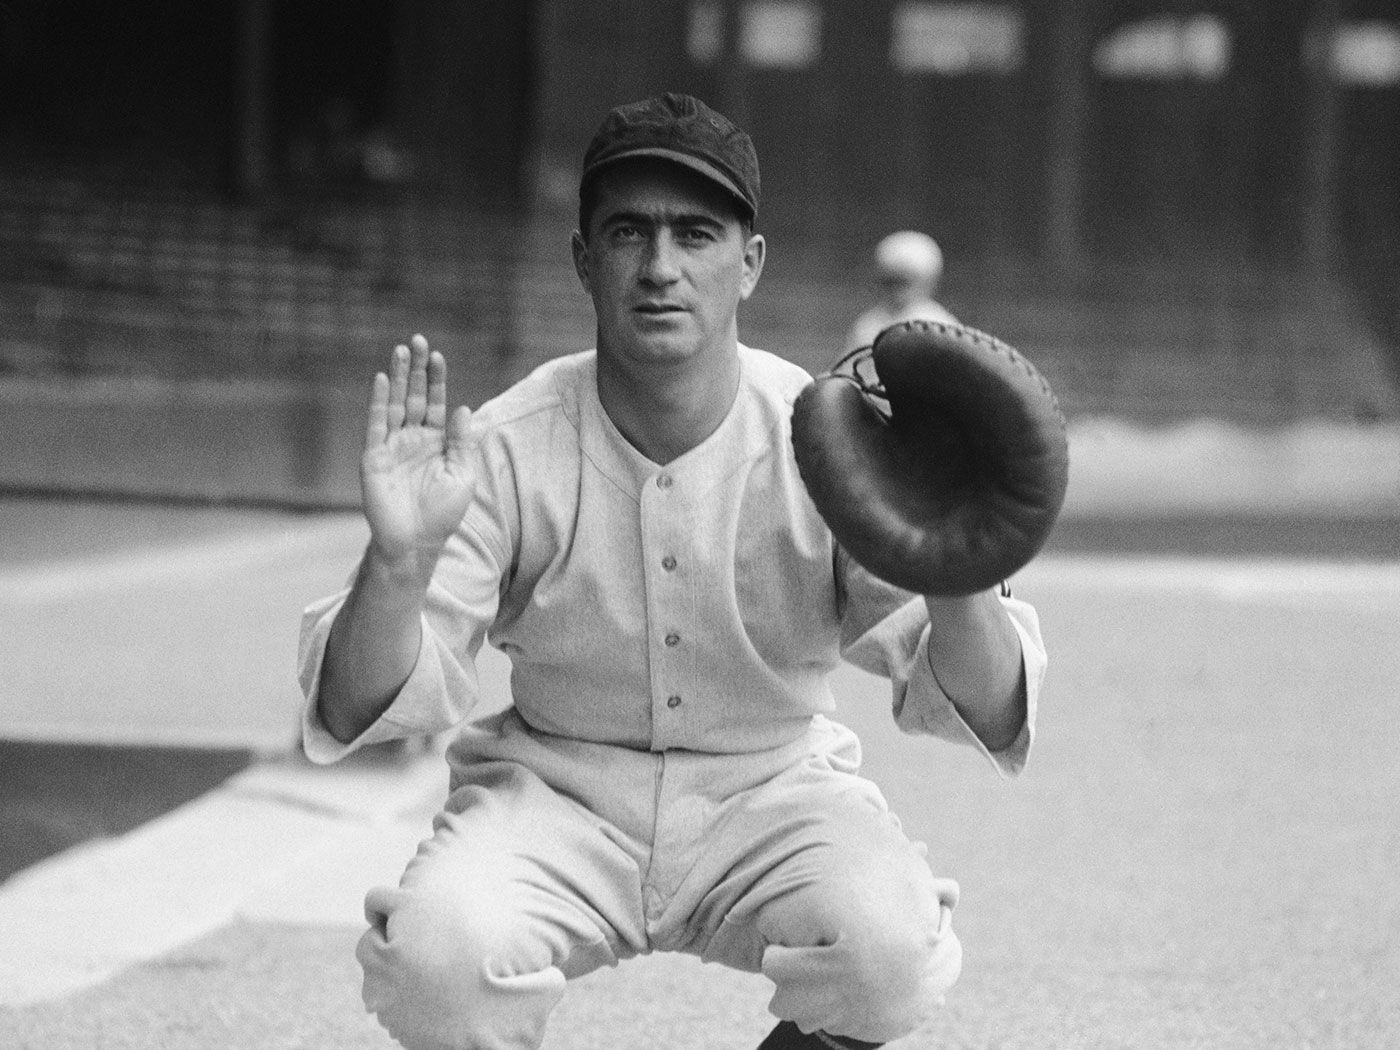 The No. 8 Most Quotable Figure in Baseball History